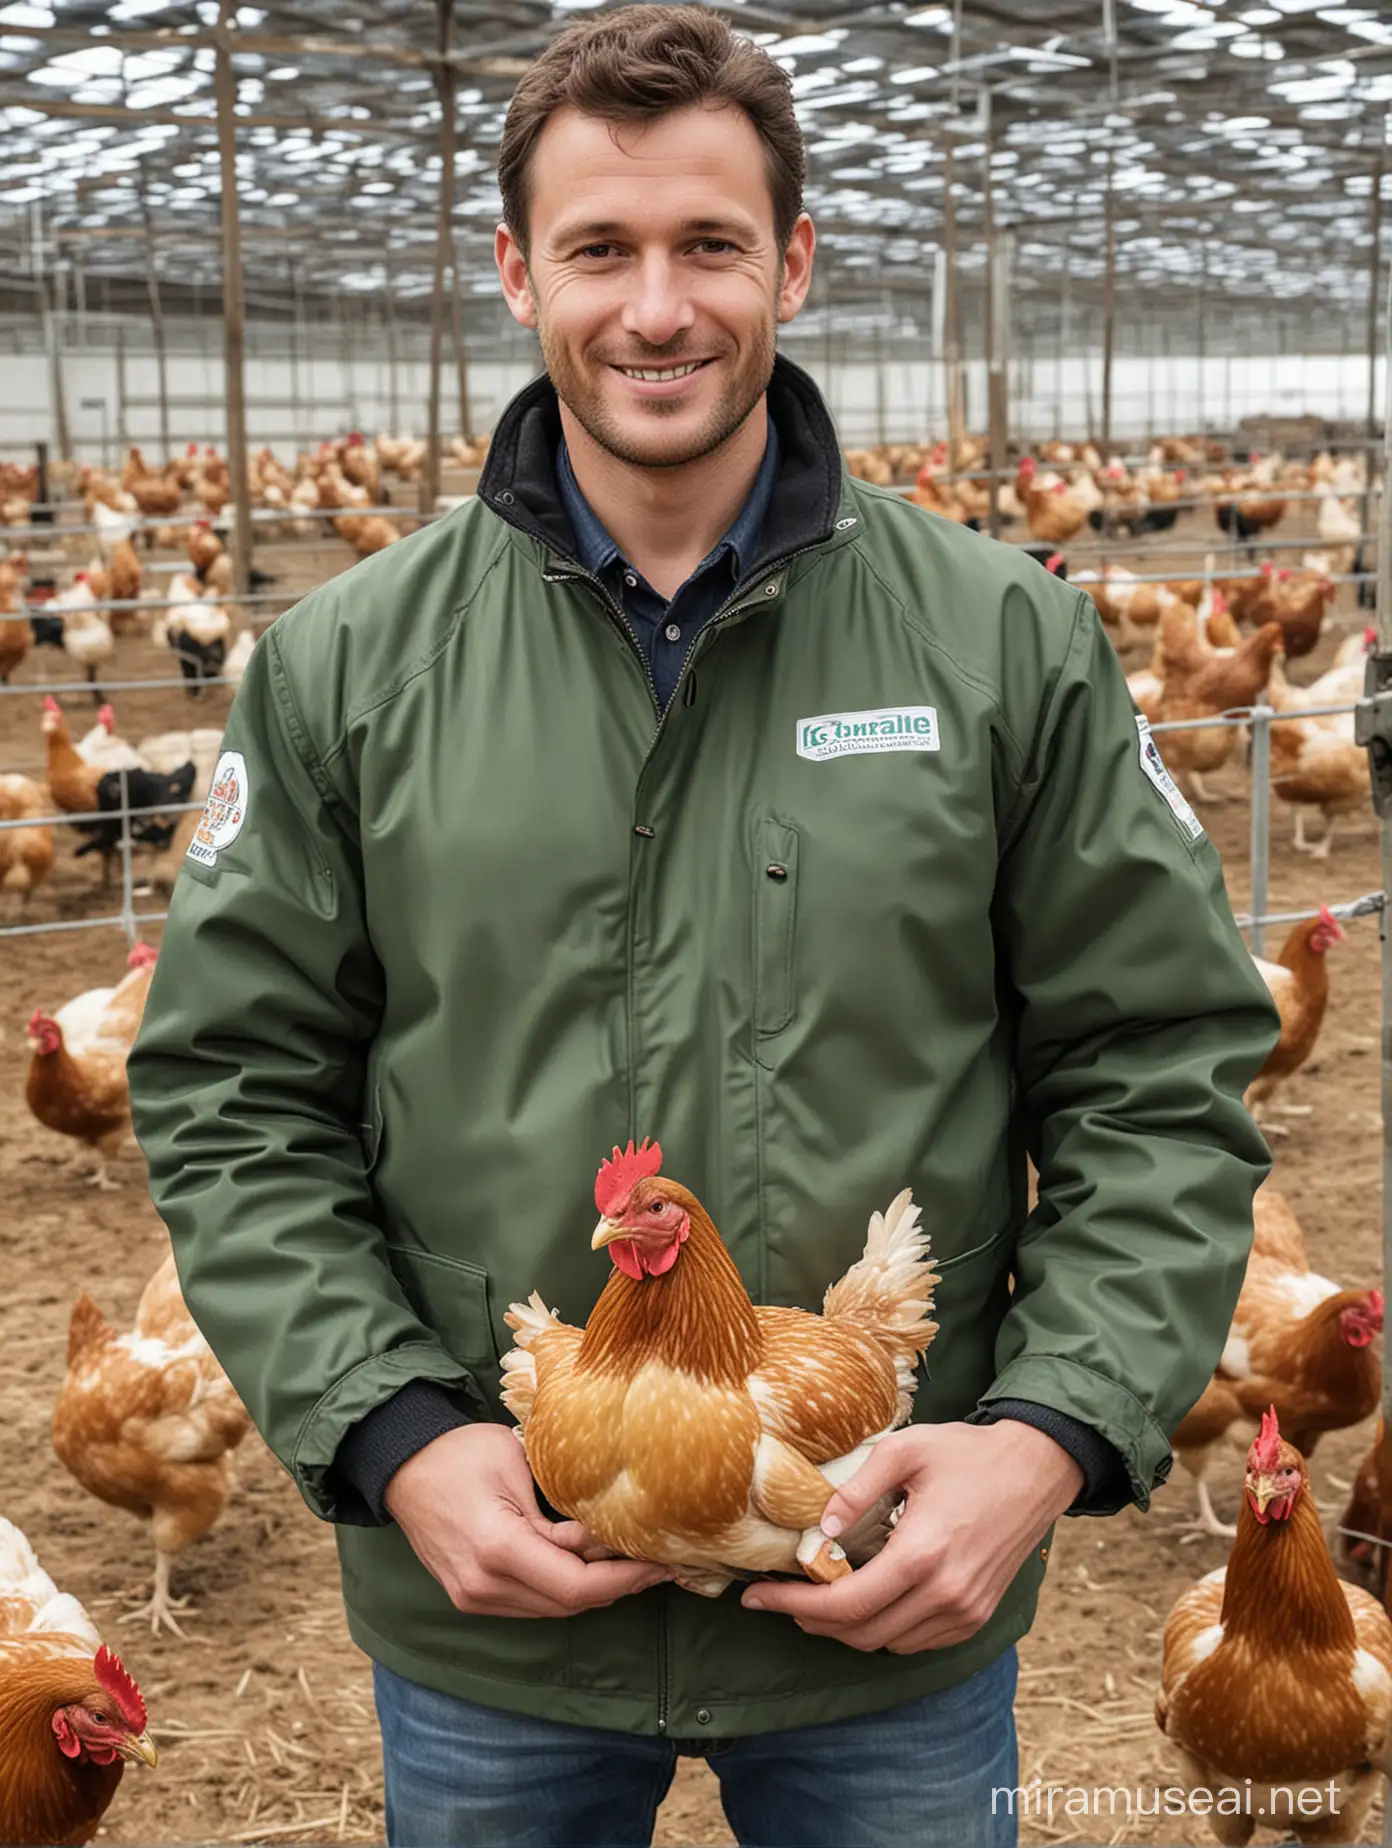 Larger Poultry Farming Michael in Jacket Feeding Chickens